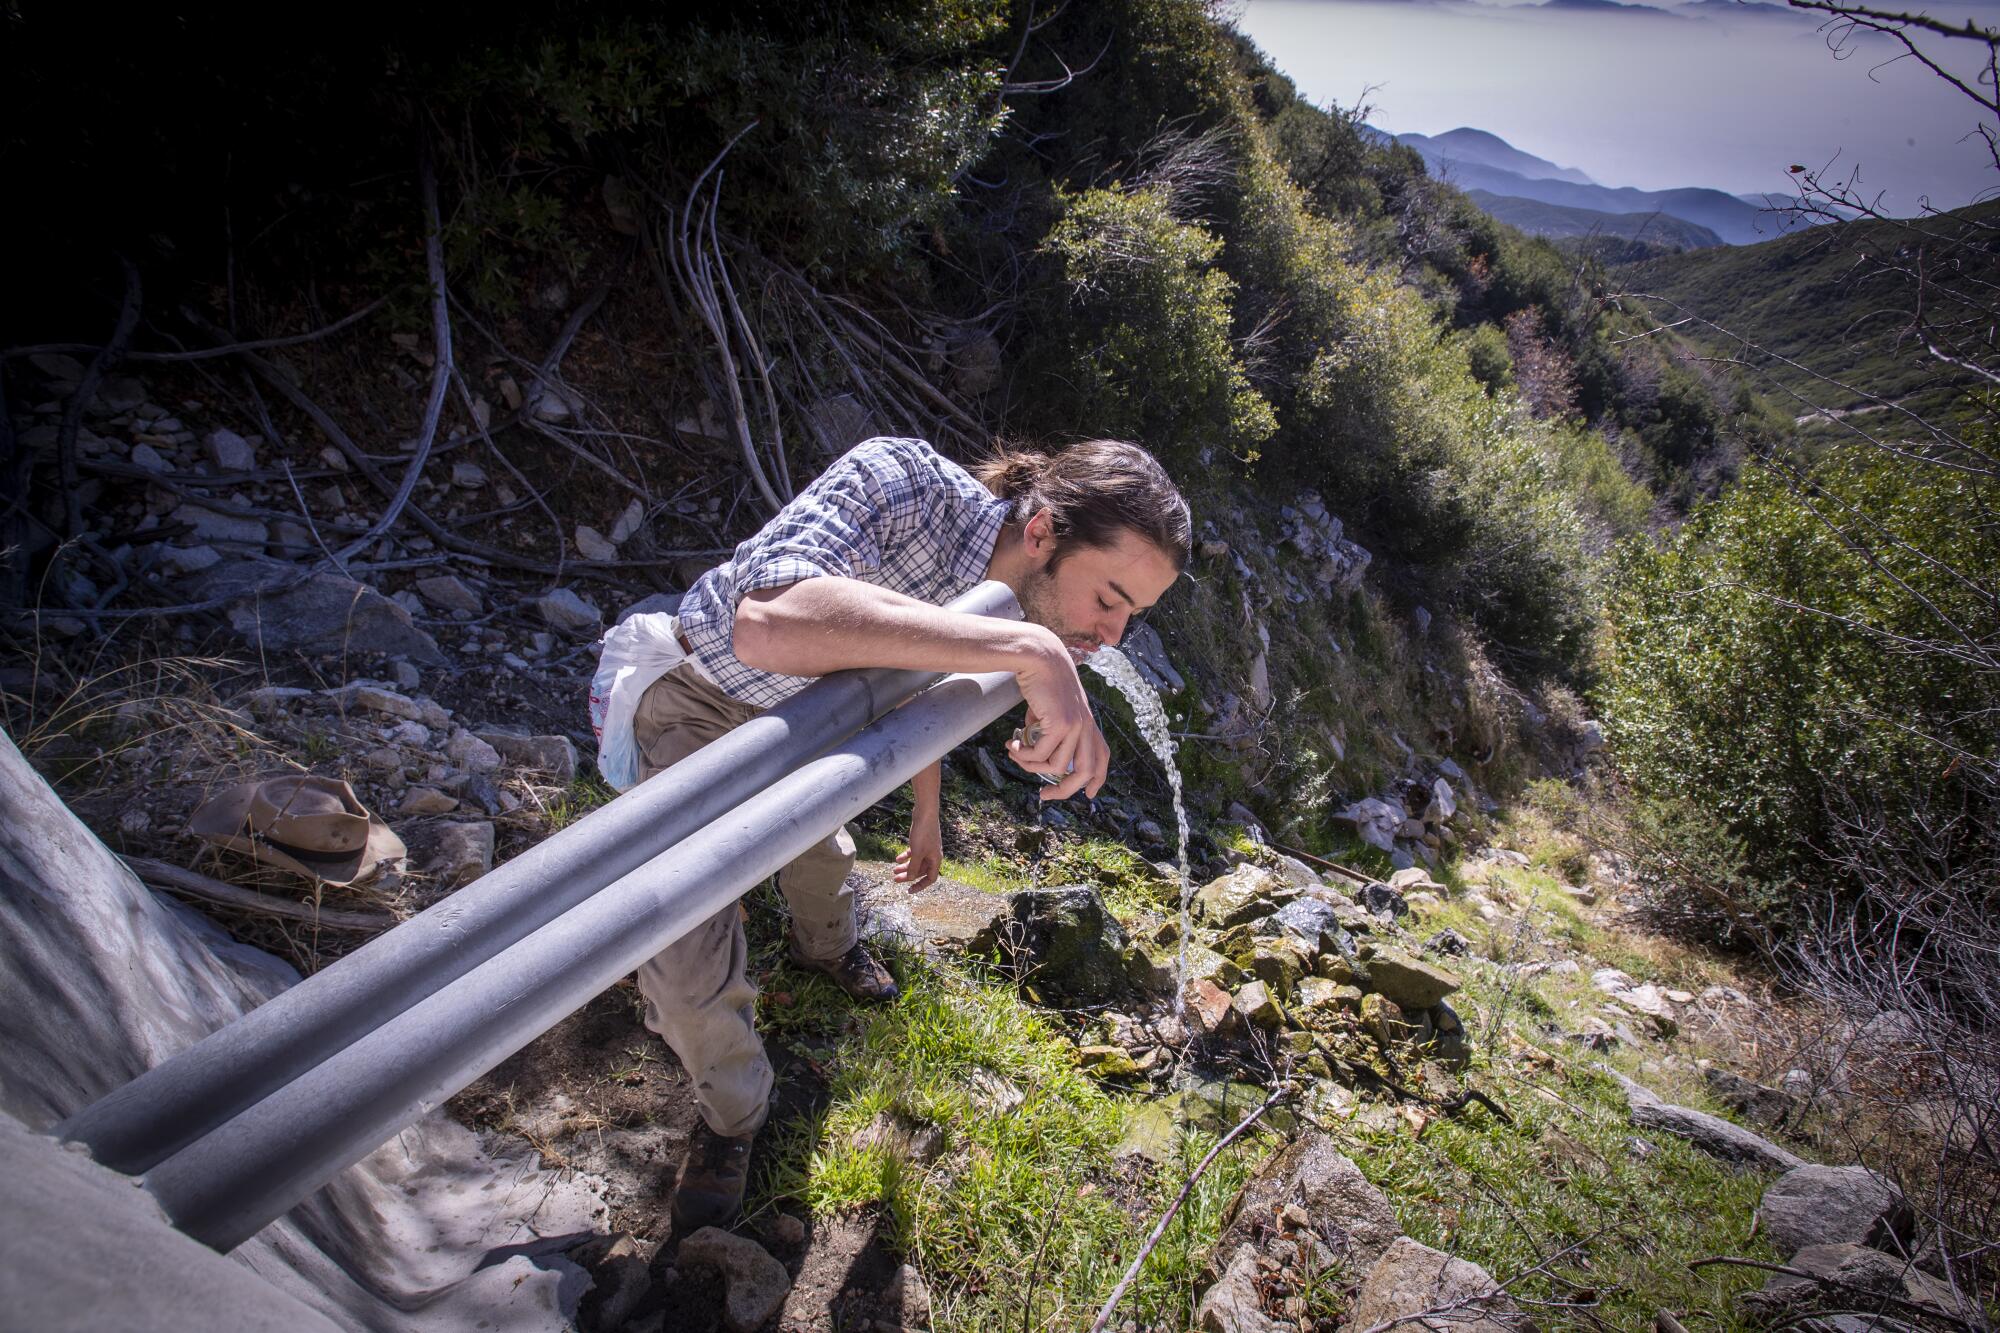 A man drinks water spilling from a pipe in a mountain forest.